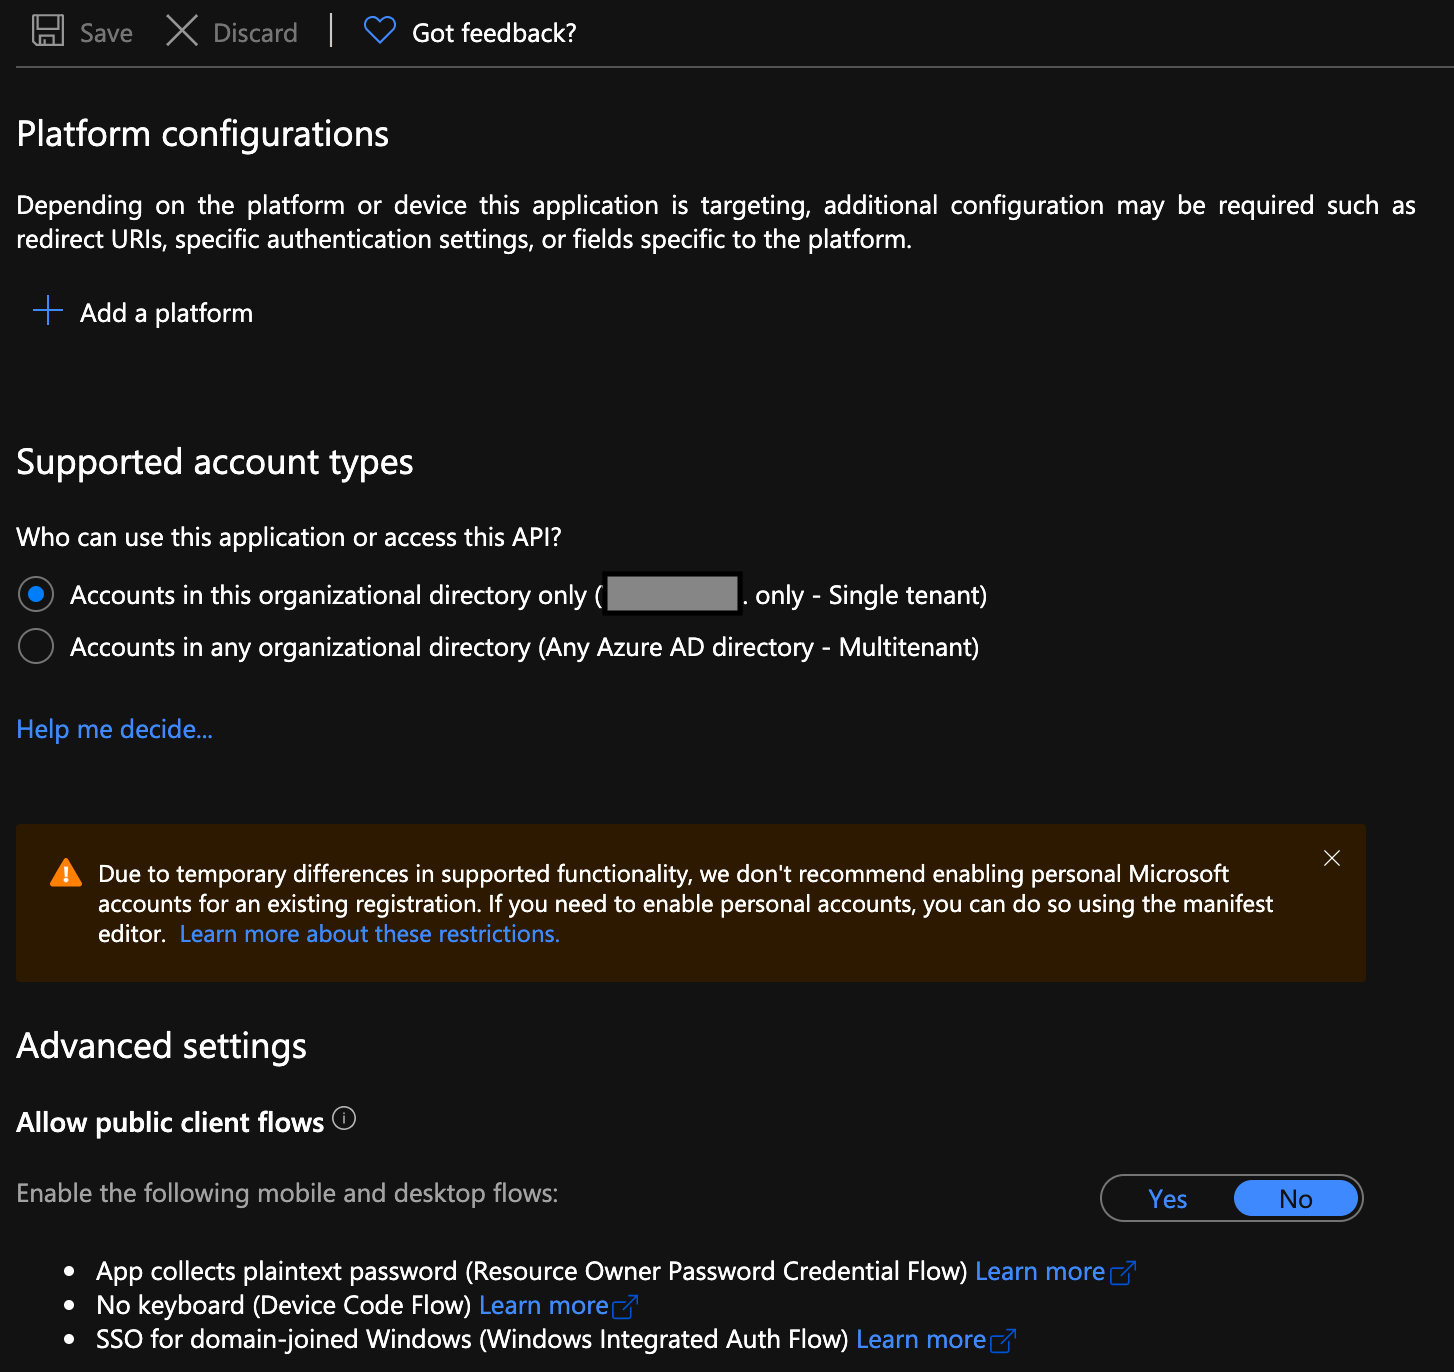 The application configuration page's Authentication page,
where you can configure Platform configurations, Supported account types, and Advanced Settings